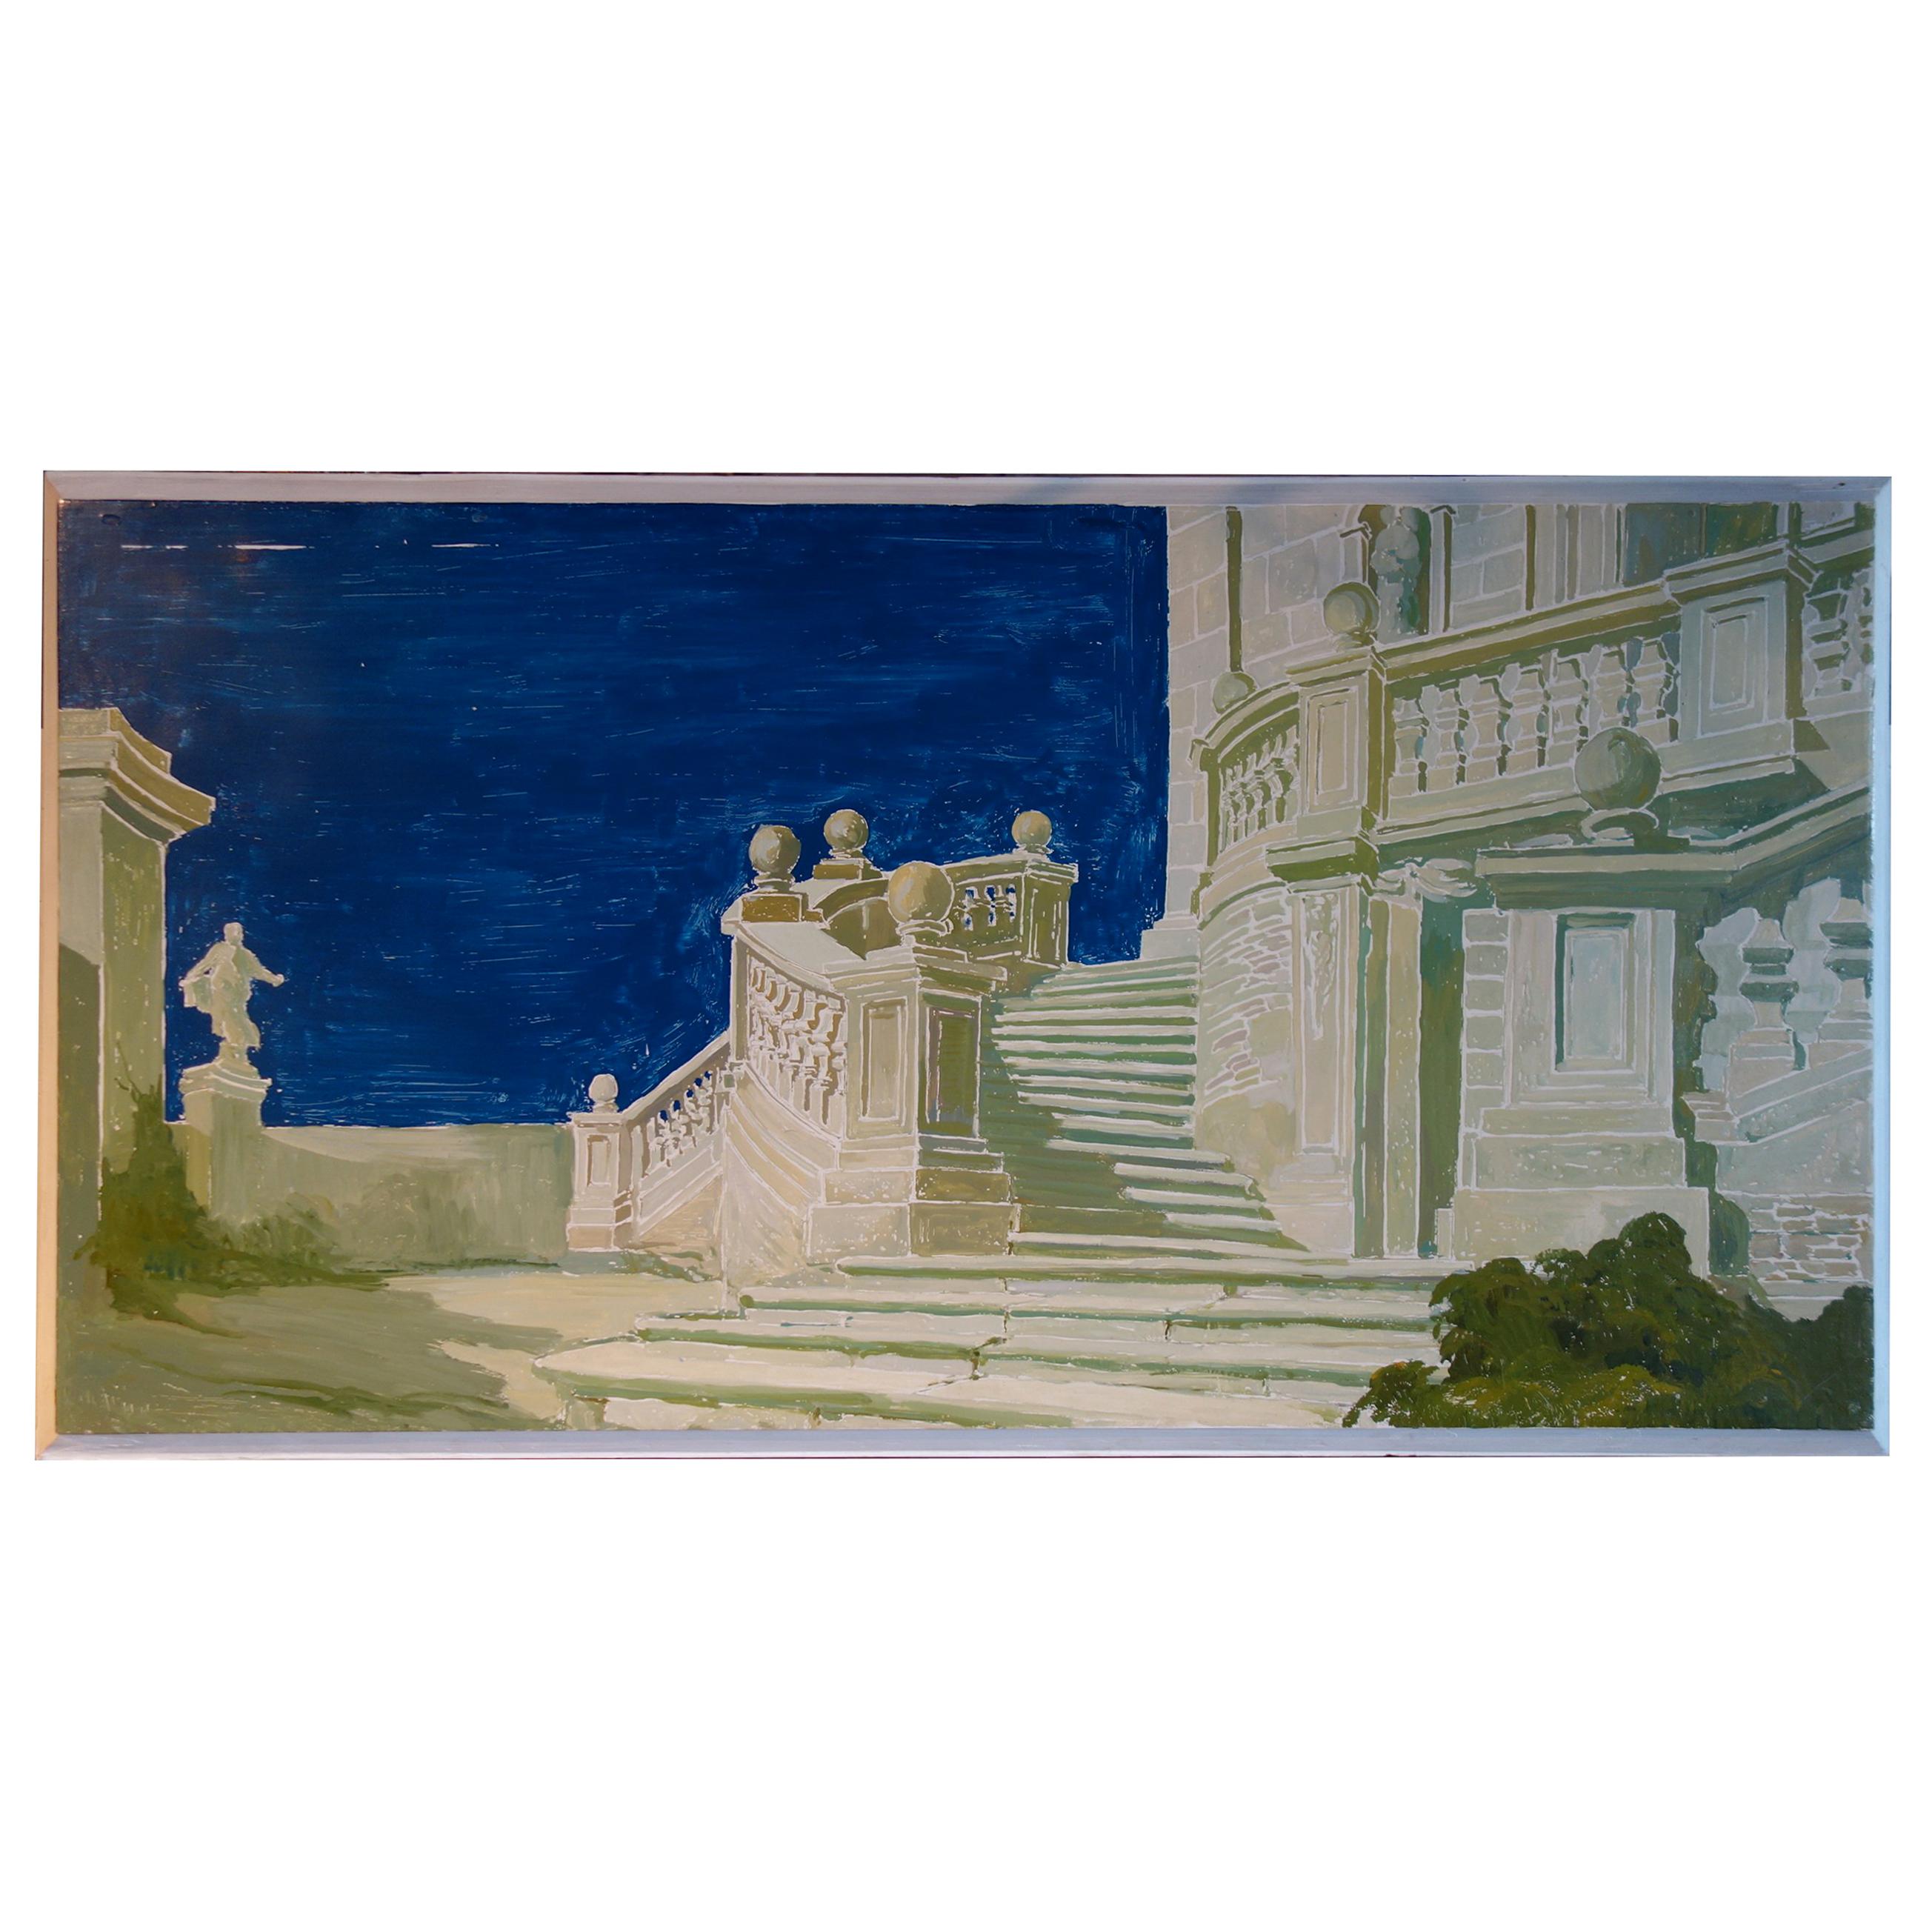 Study for a Painting of a Classic Italian Garden Courtyard on Board